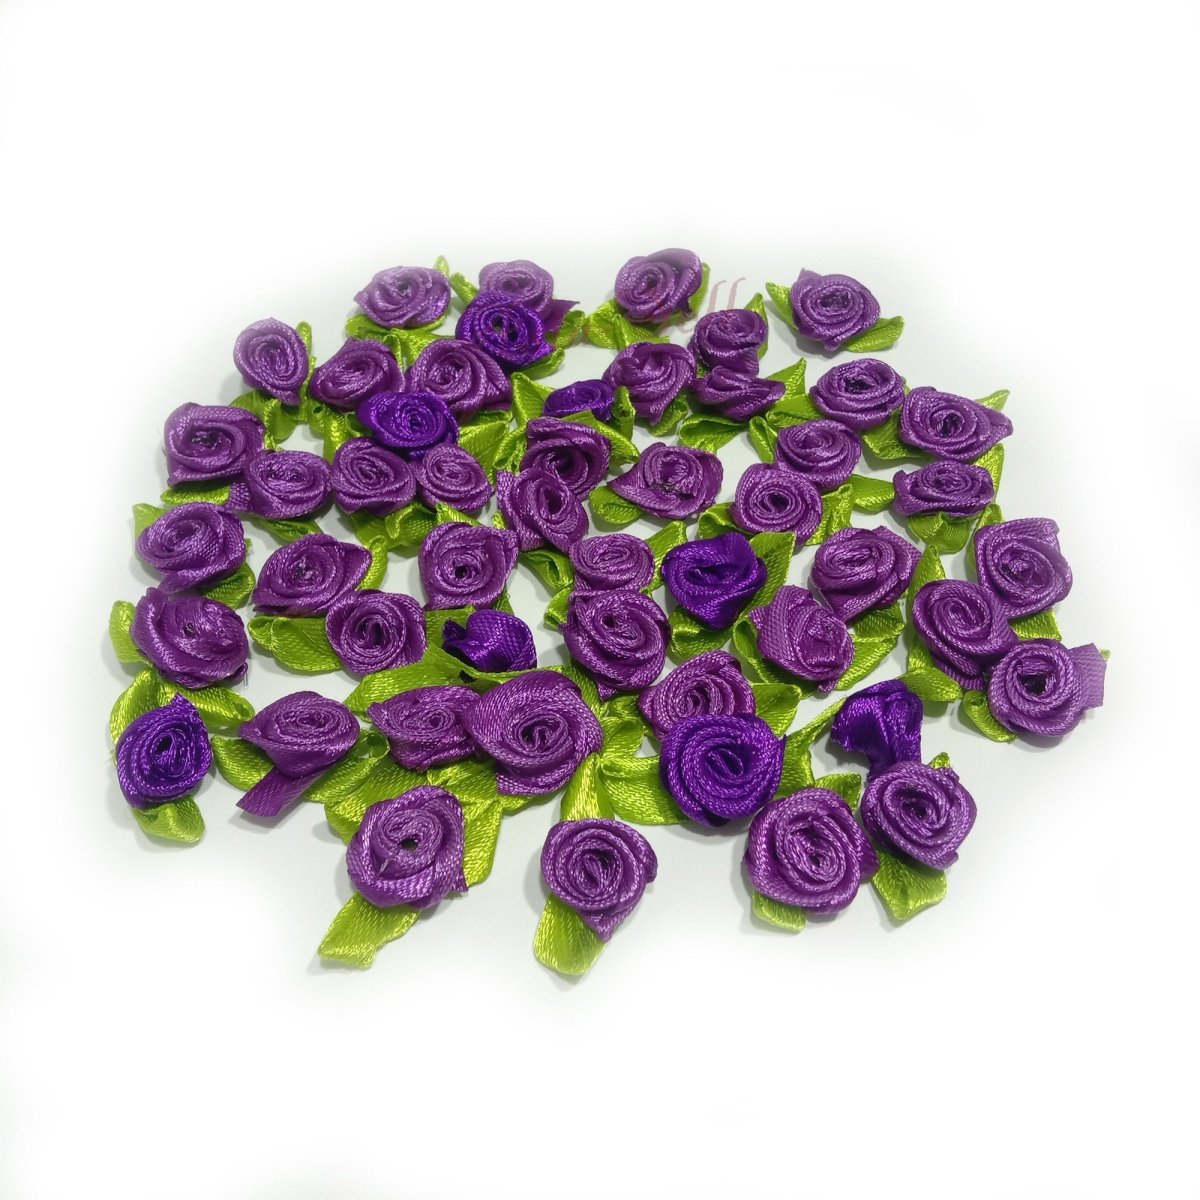 40pcs Mini Artificial Flowers Heads Small Ribbon Roses DIY Crafts Wedding Decorations - Lilac Purple - - Asia Sell